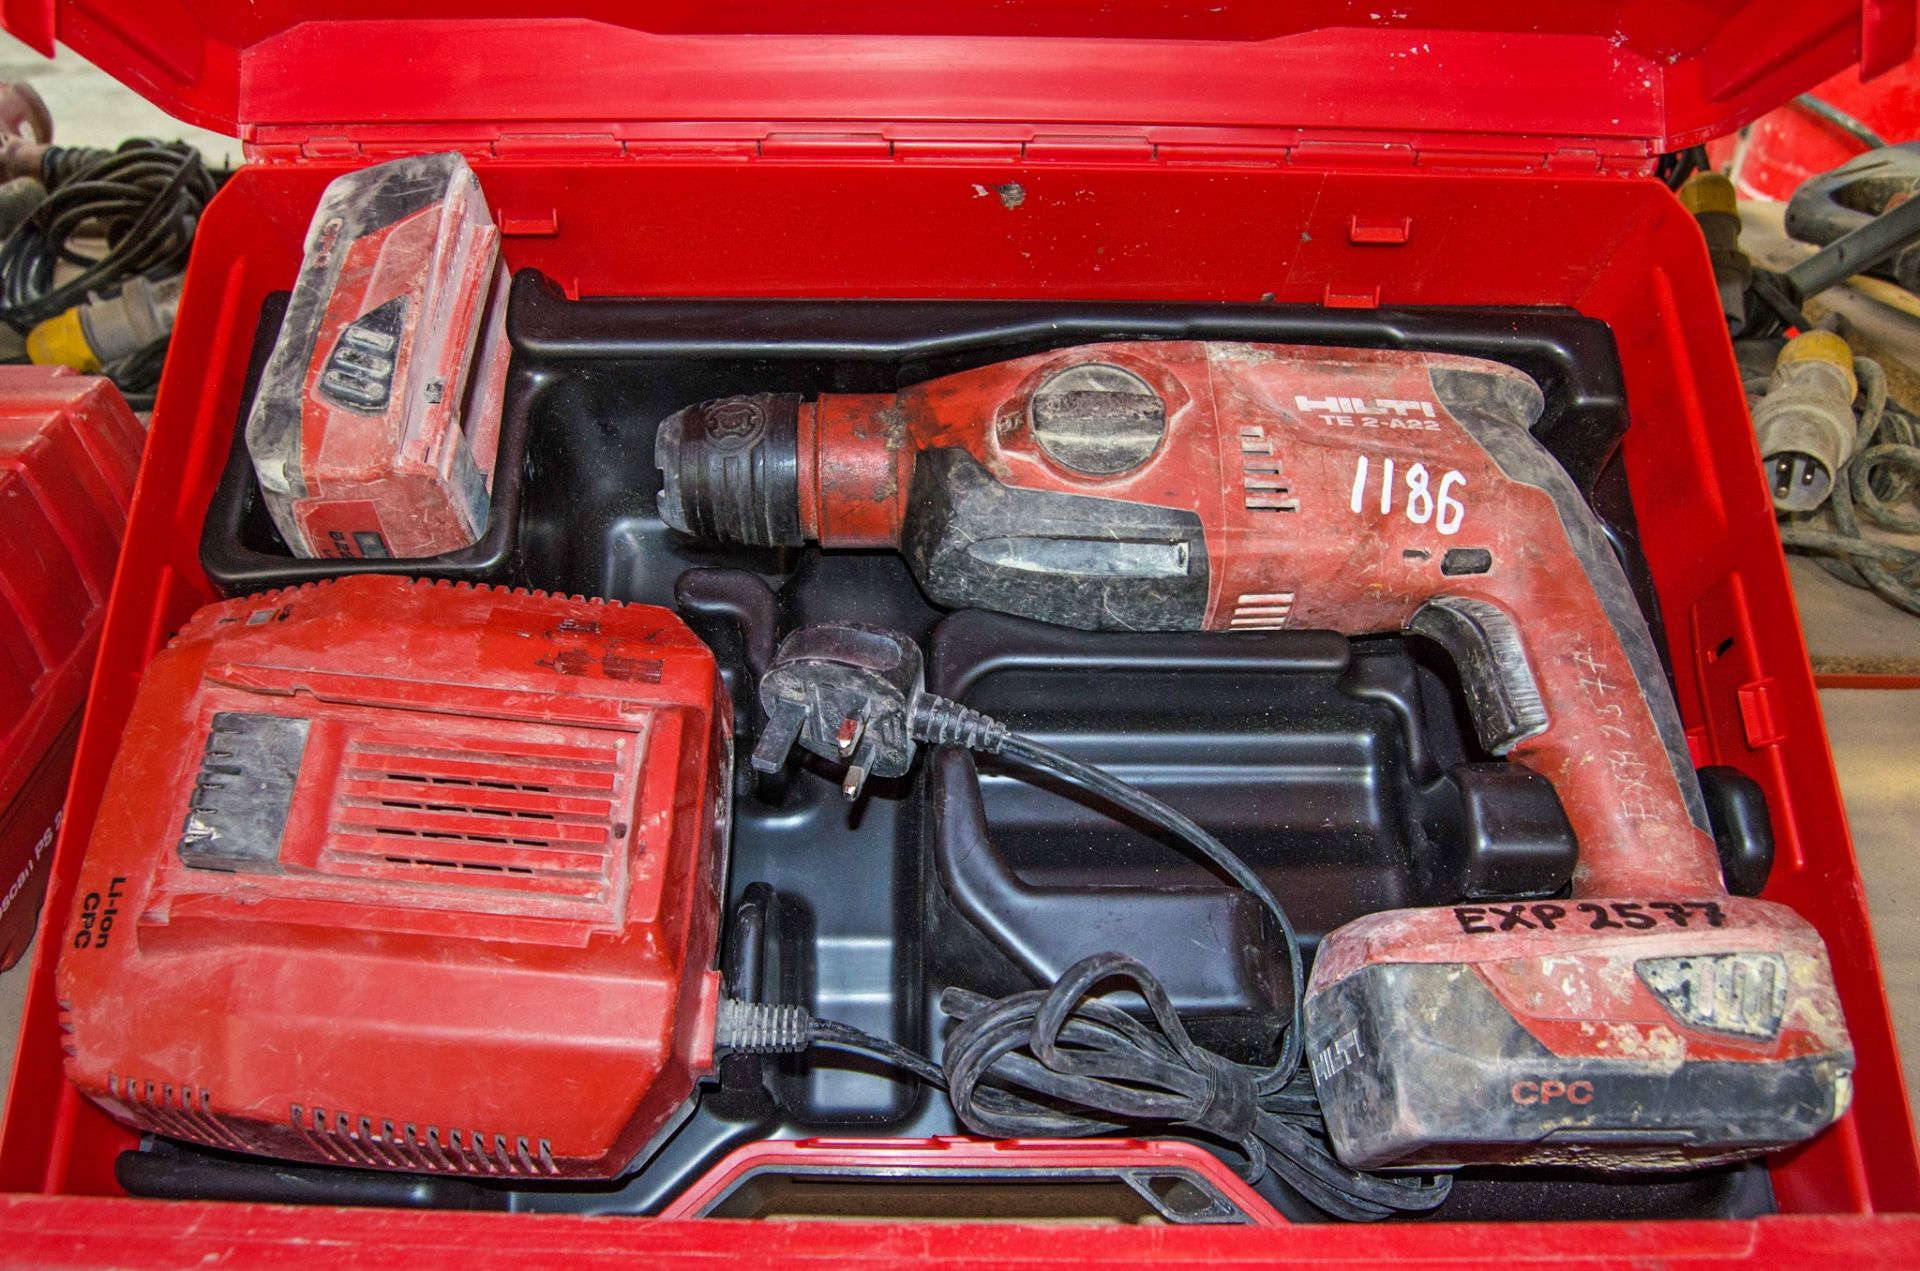 Hilti T2-A22 22v cordless SDS rotary hammer drill 2 batteries, charger and carry case EXP2577